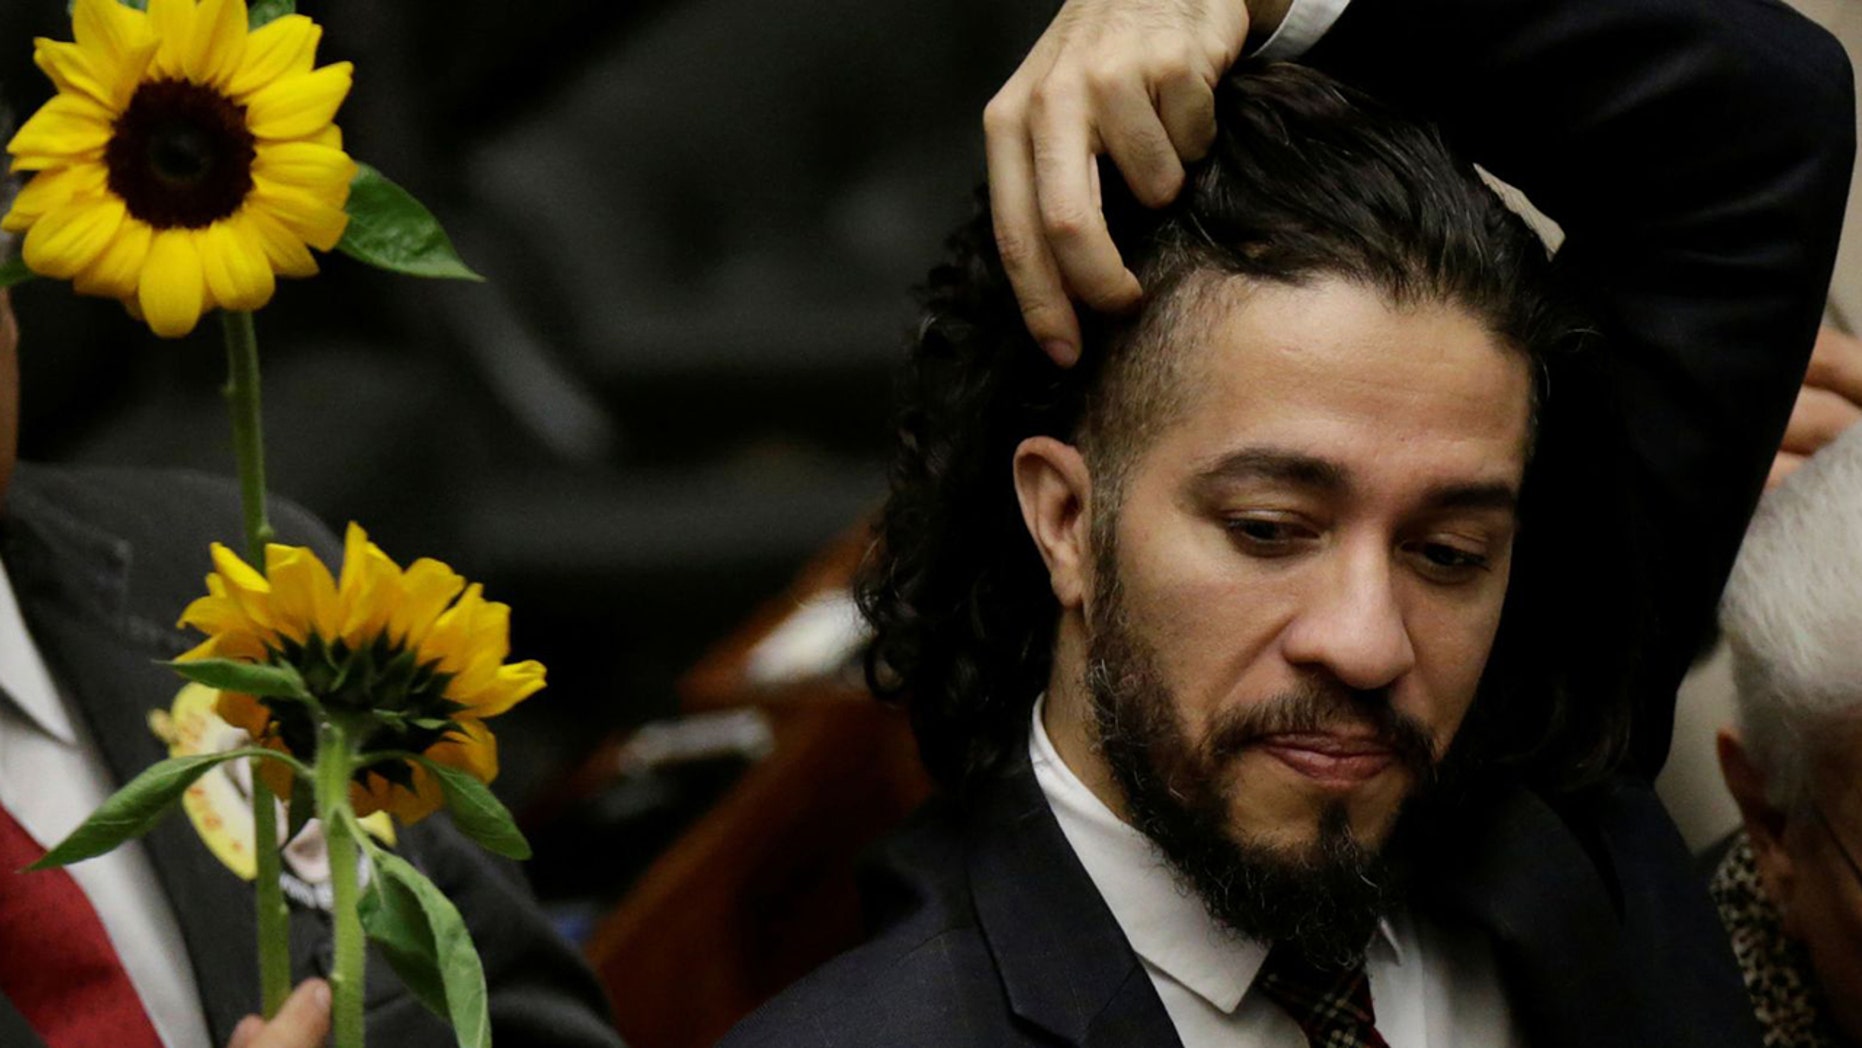 Openly gay Brazilian congressman resigns, flees country over death threats